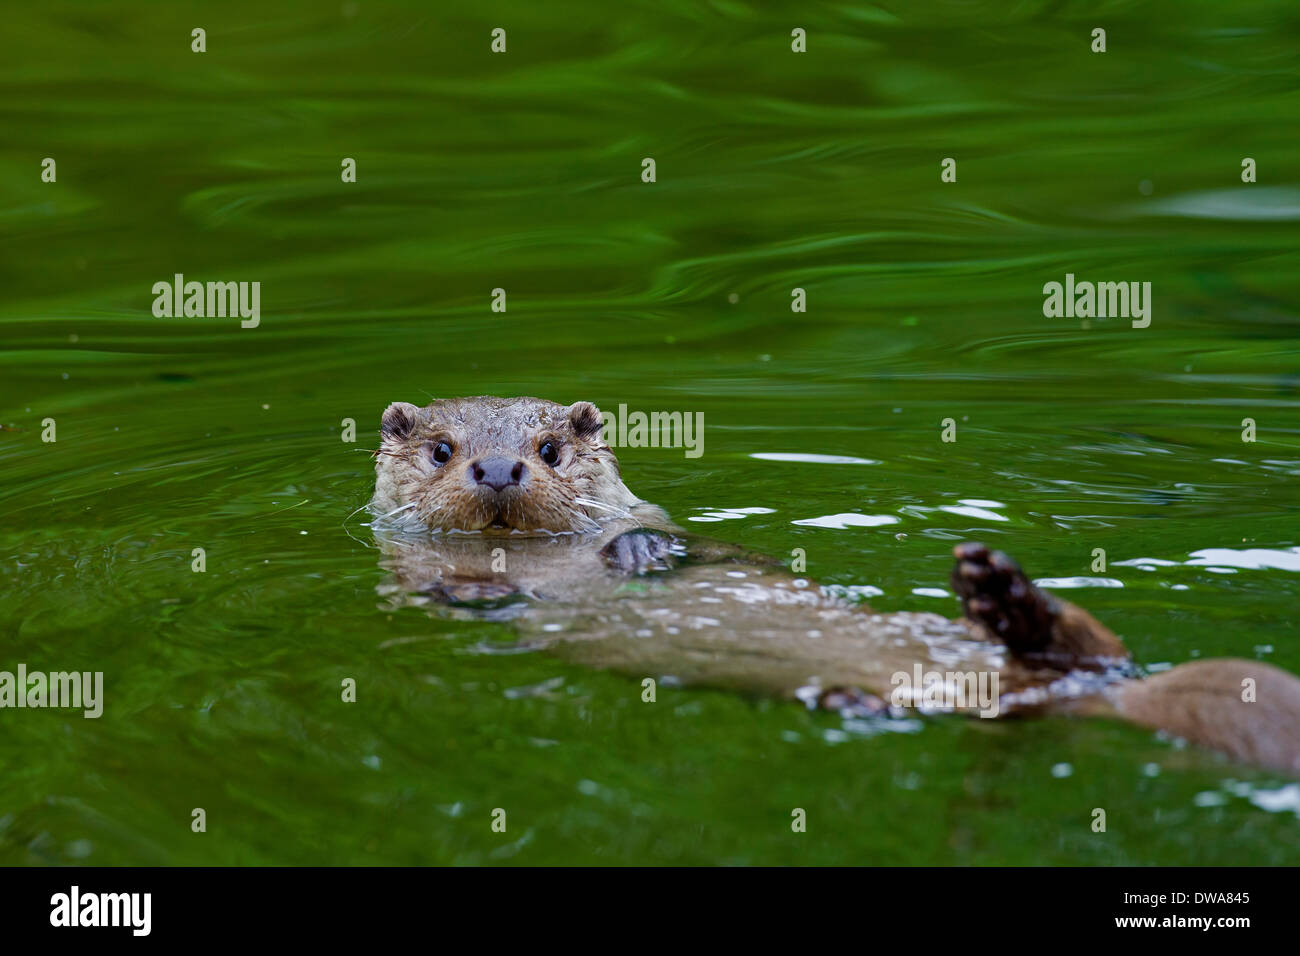 European River Otter (Lutra lutra) swimming in water on its back Stock Photo